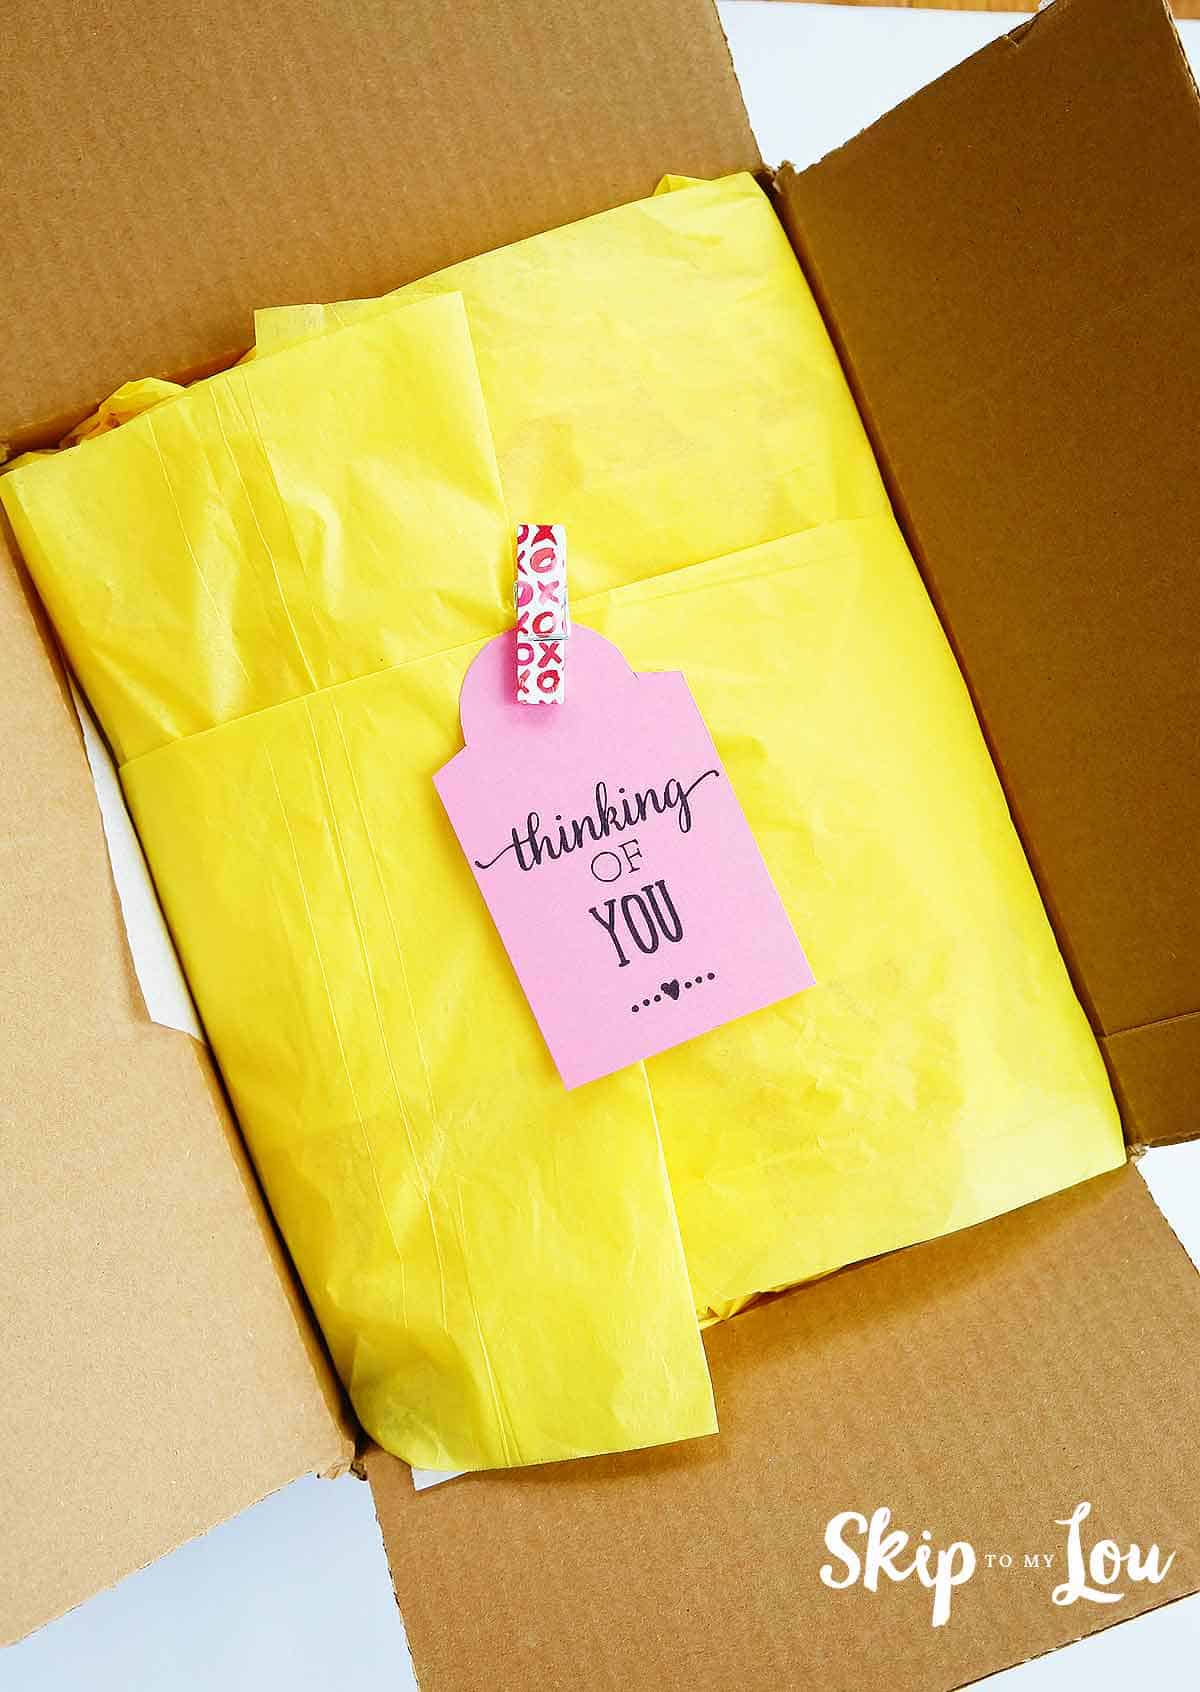 the-best-care-package-ideas-free-printables-world-celebrat-daily